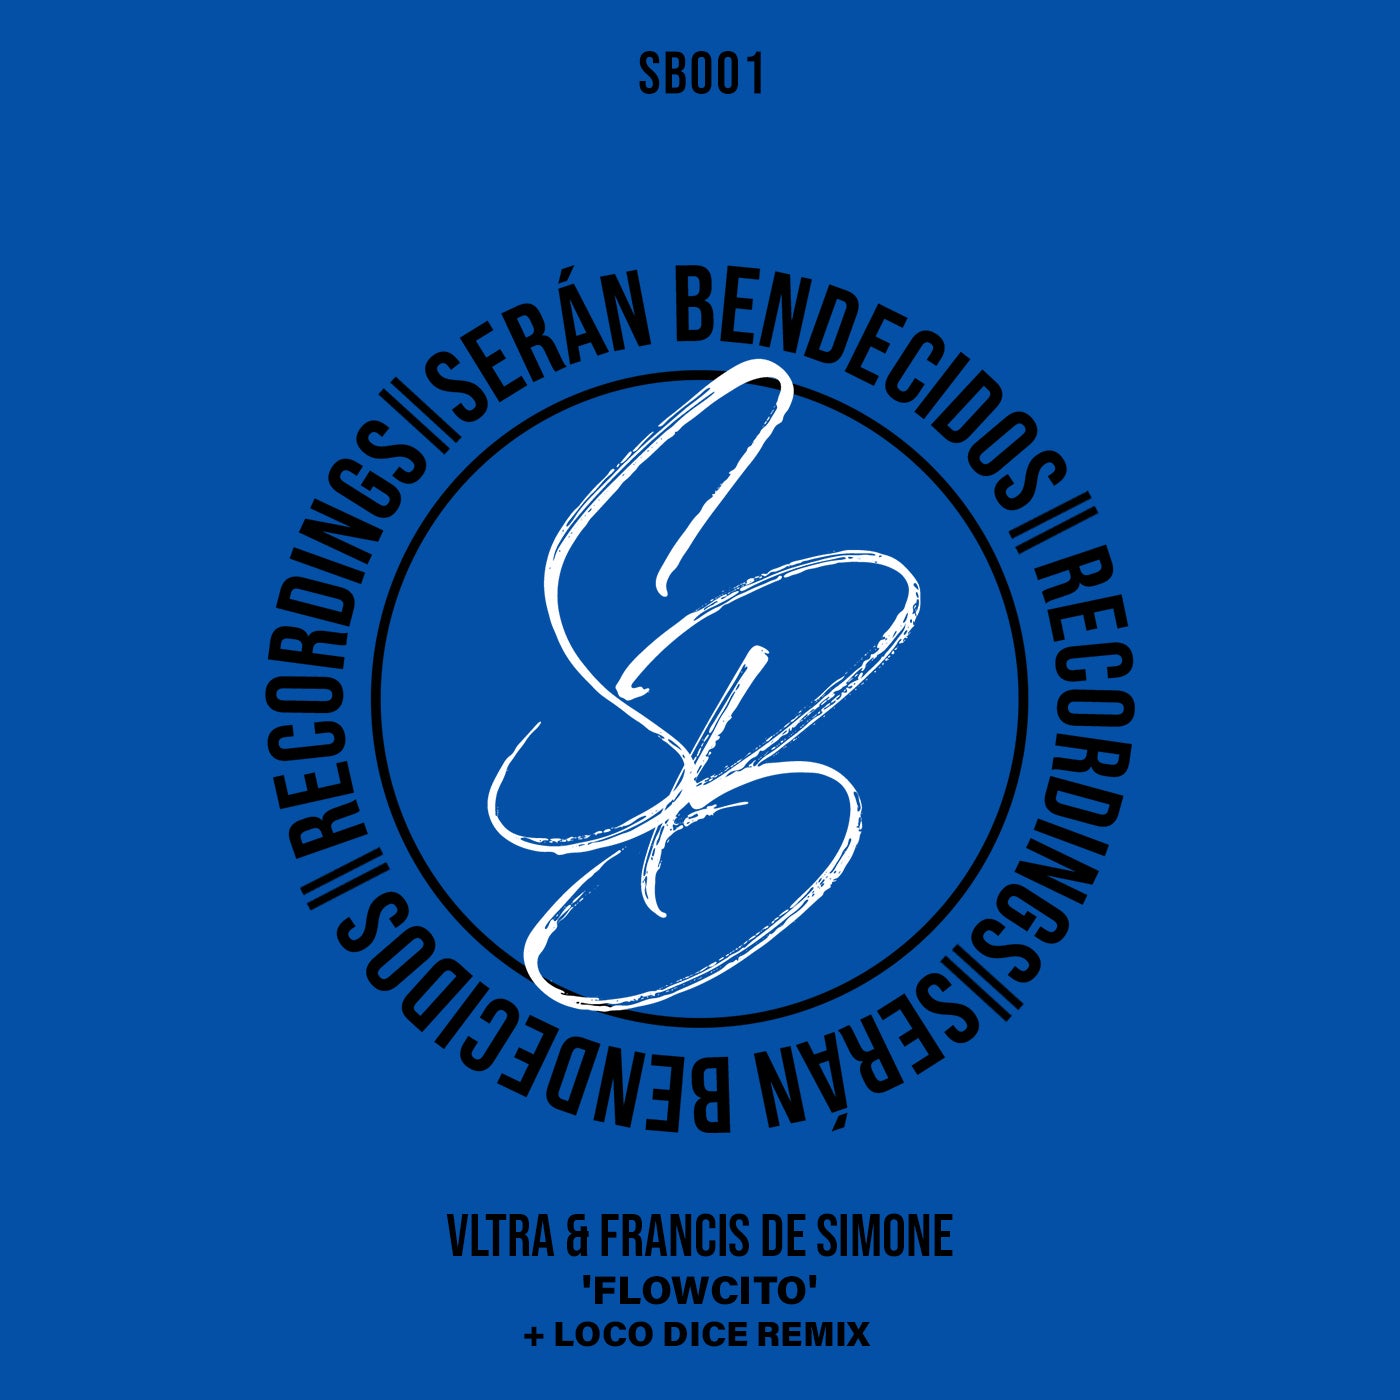 Loco Dice launches new label Serán Bendecidos, welcoming VLTRA and Francis De Simone for the imprint’s first release